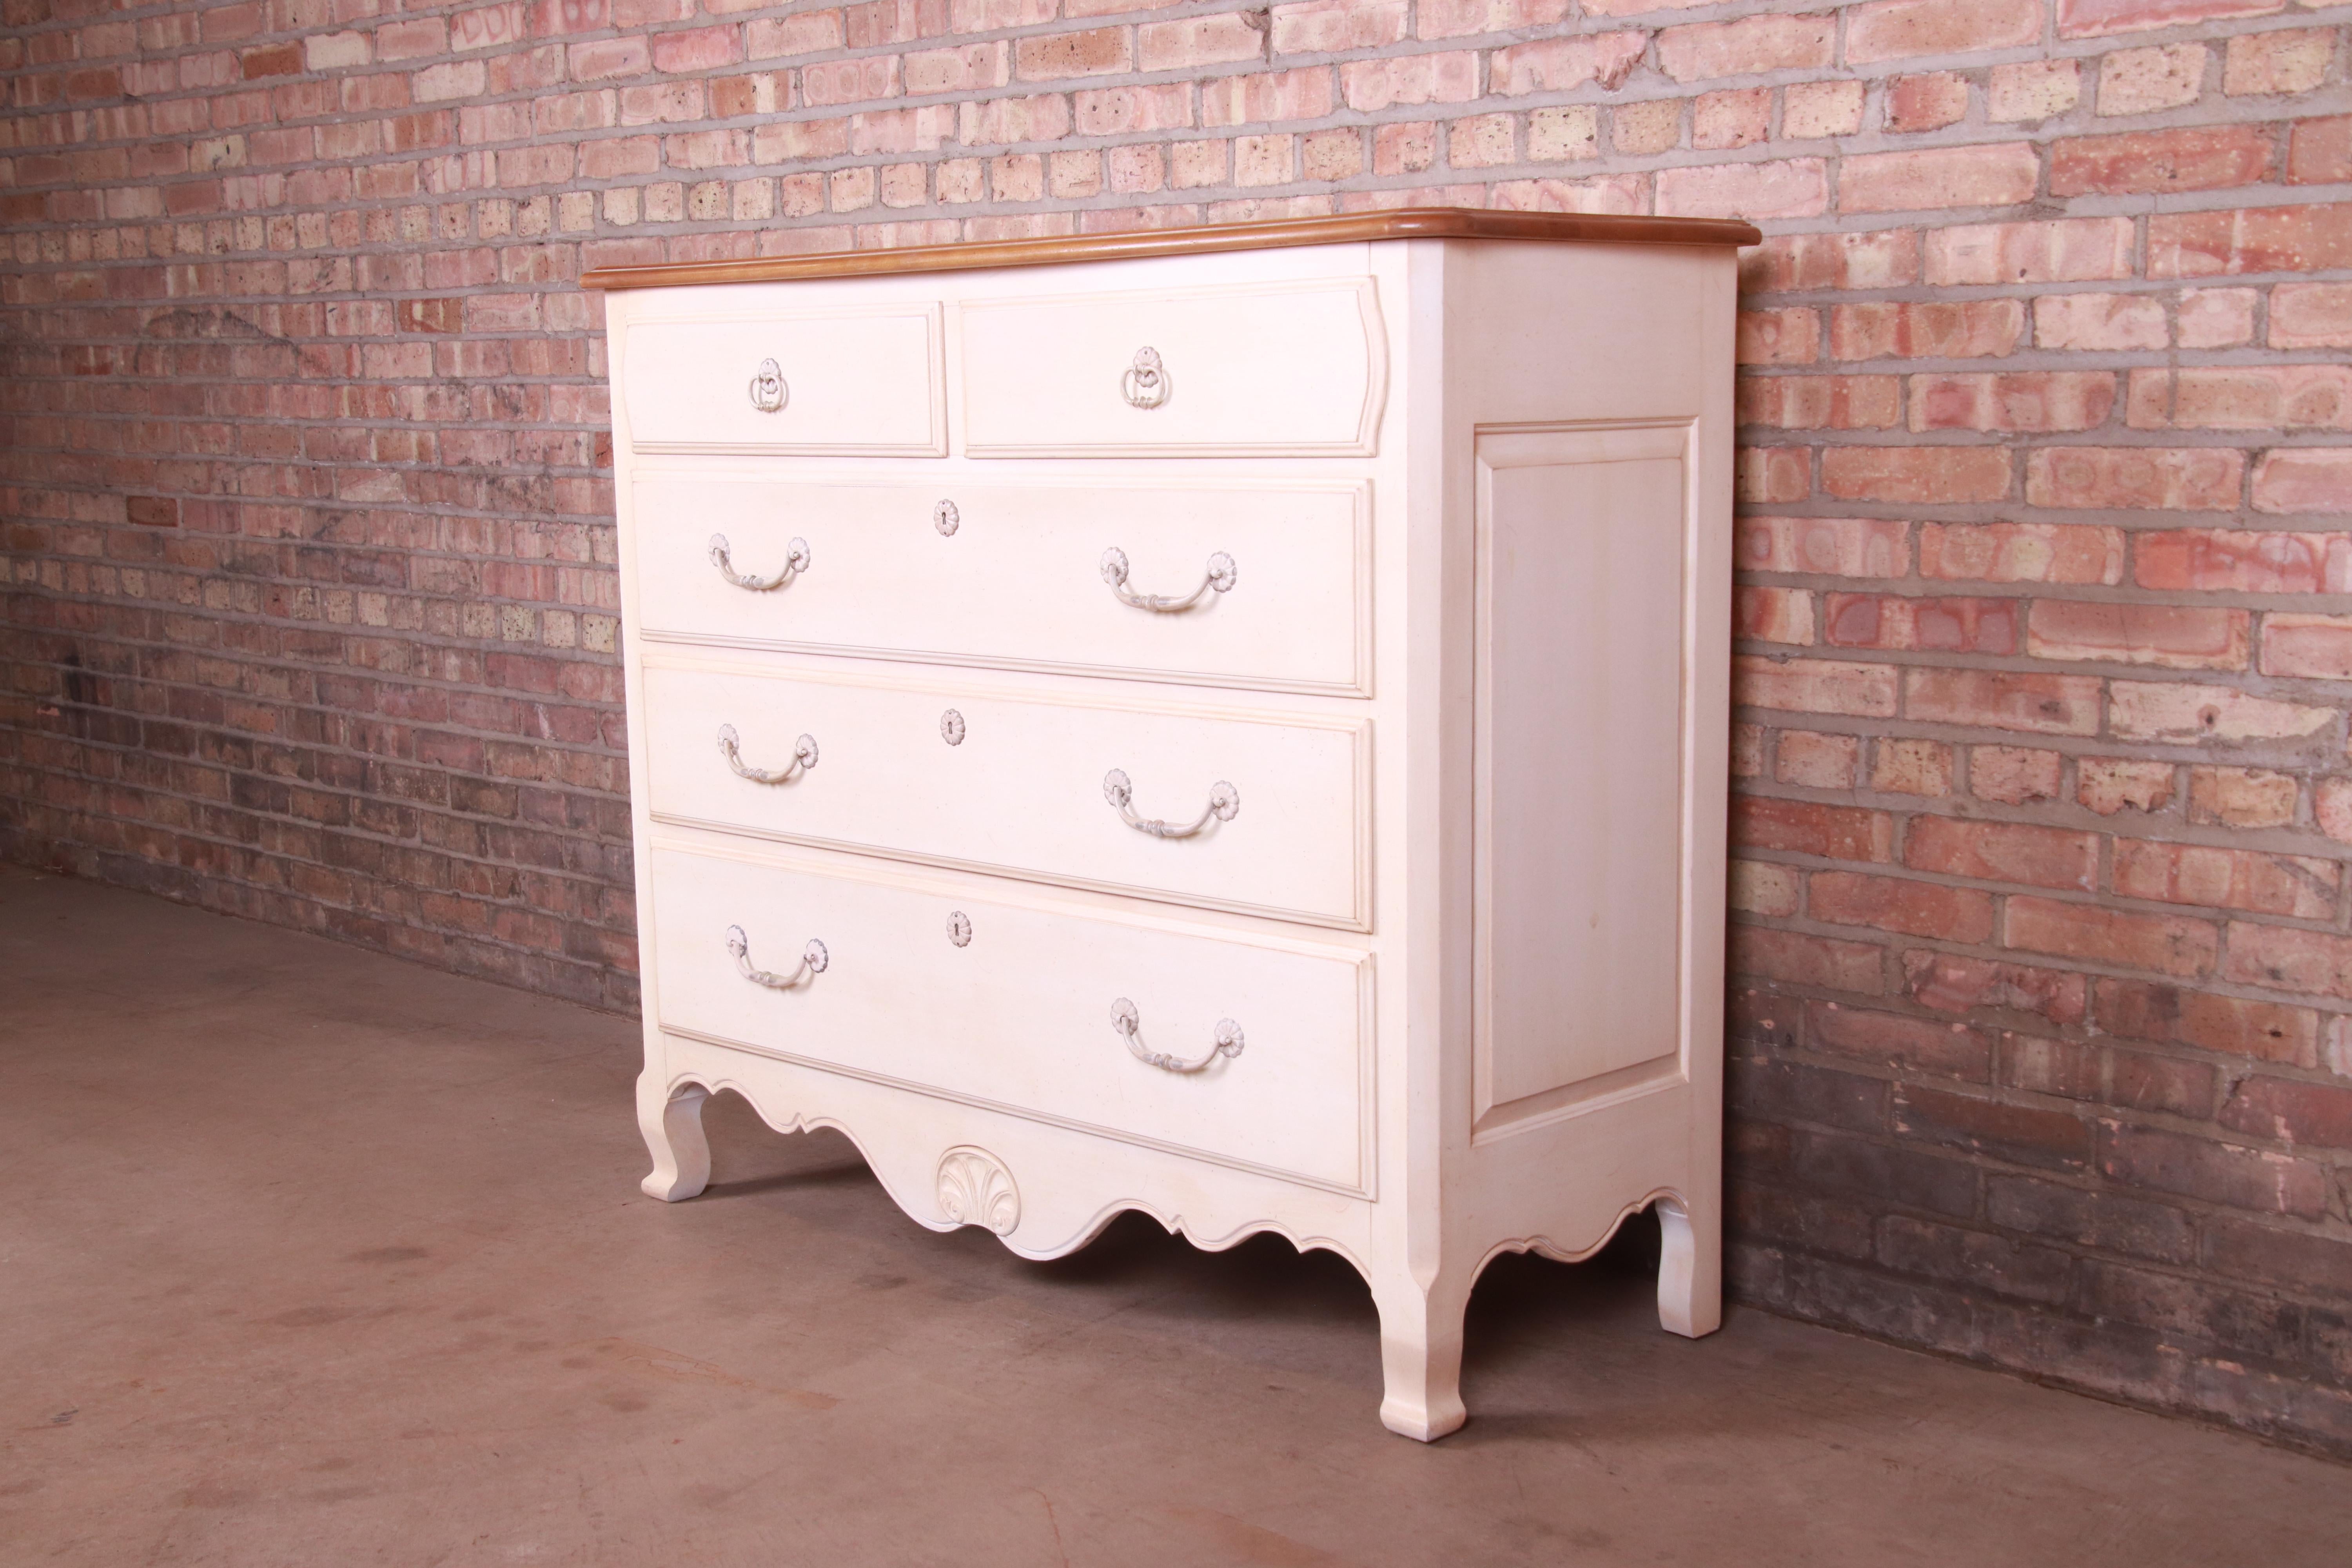 American Ethan Allen French Provincial Louis XV White Lacquered Maple Chest of Drawers